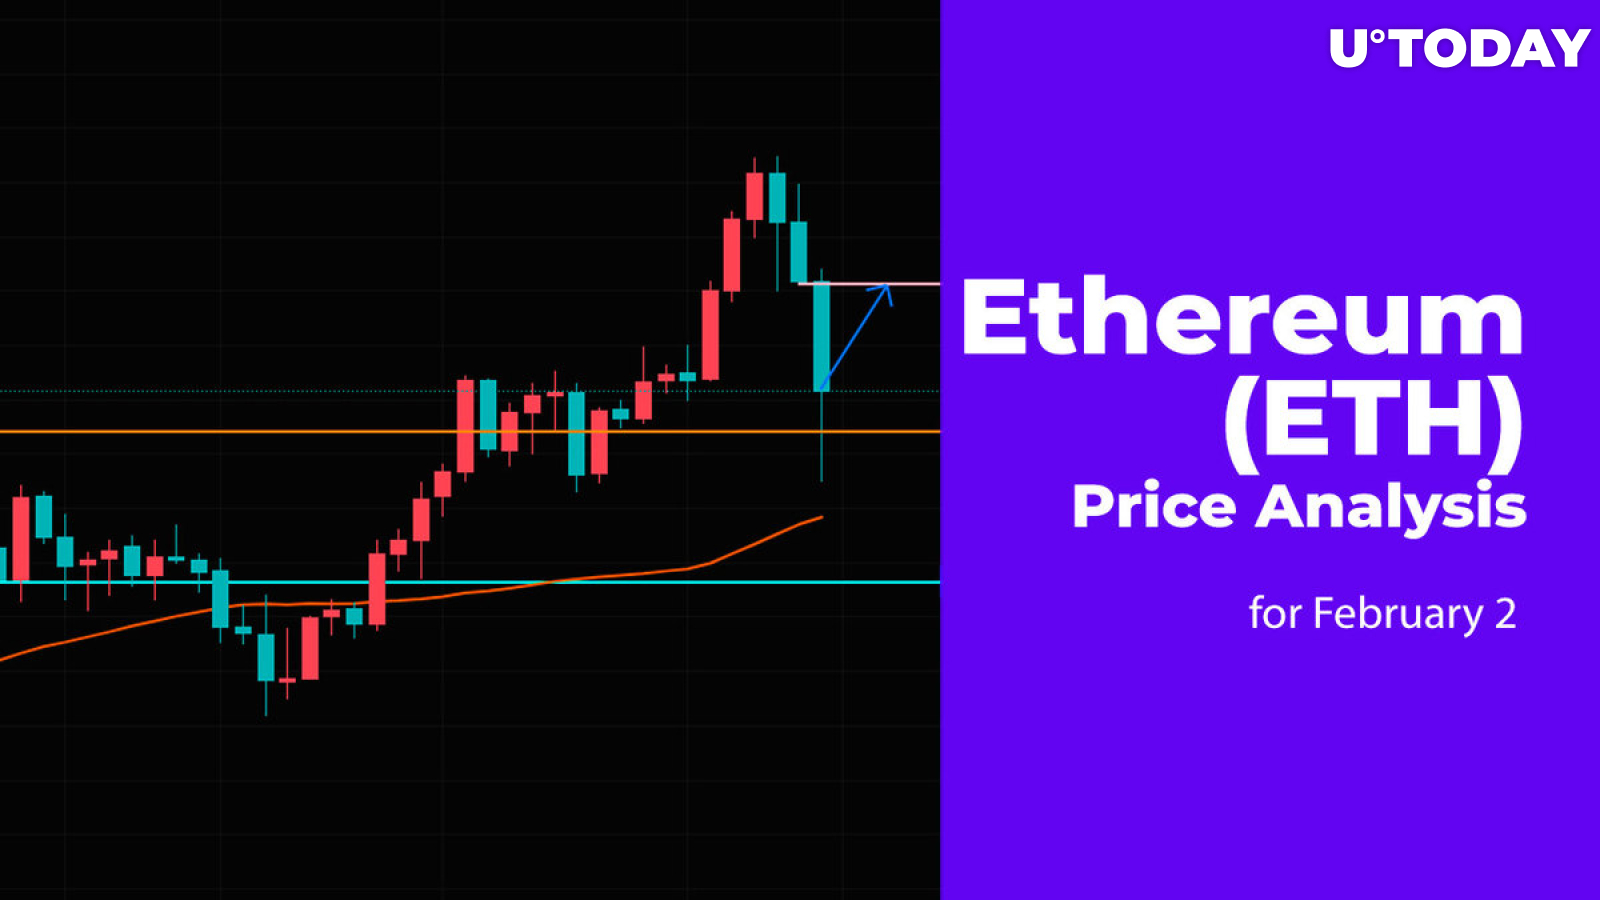 Ethereum (ETH) Price Analysis for February 2